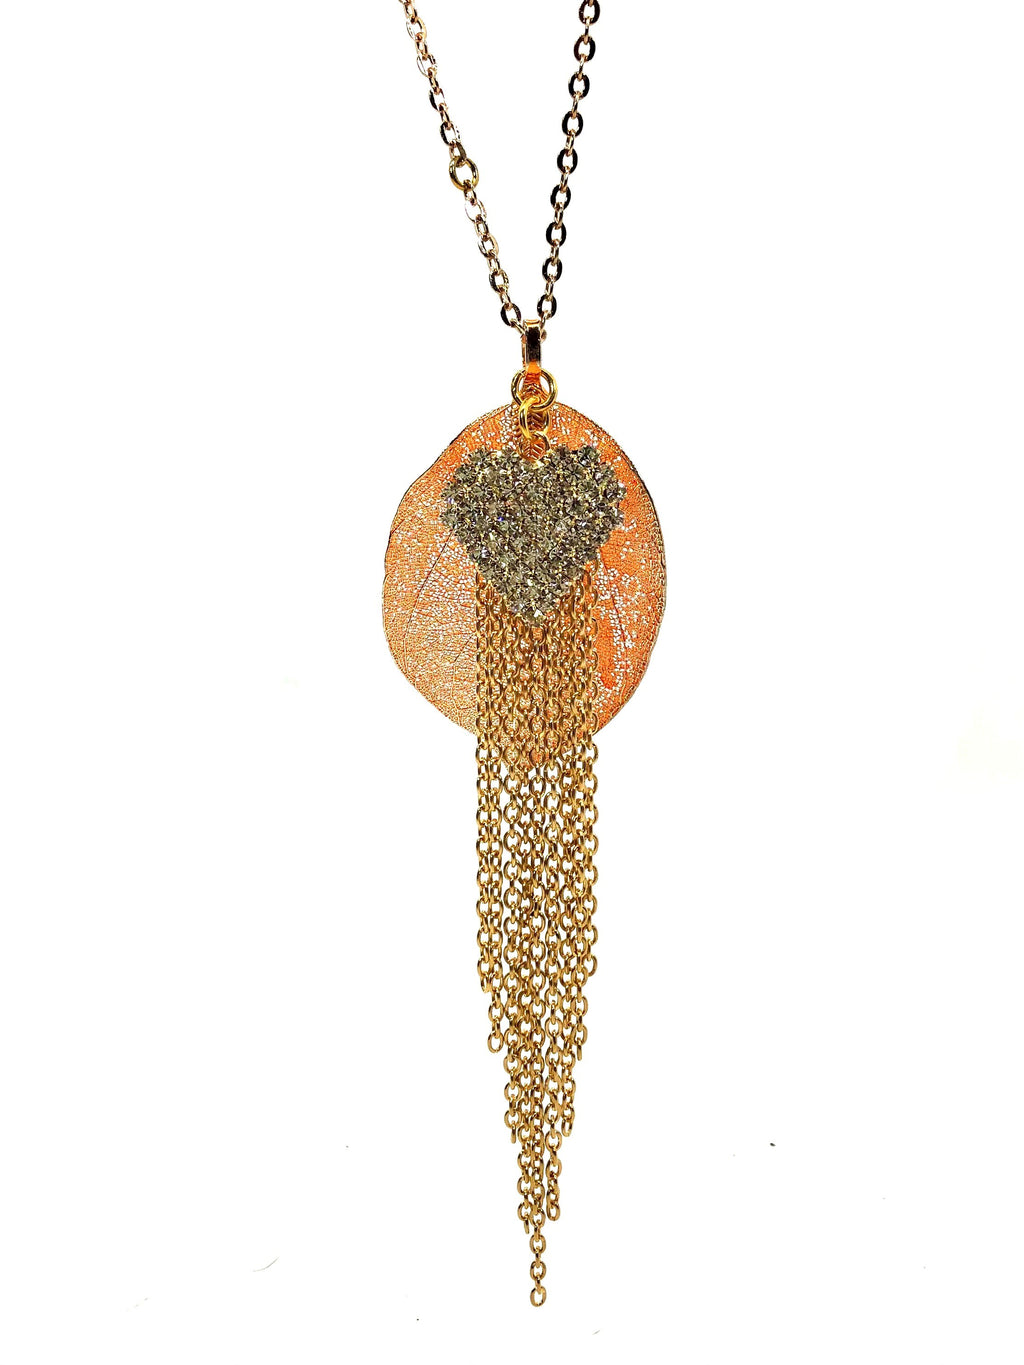 Chain Necklace - Gold filigree leaf with crystals and chain pendant